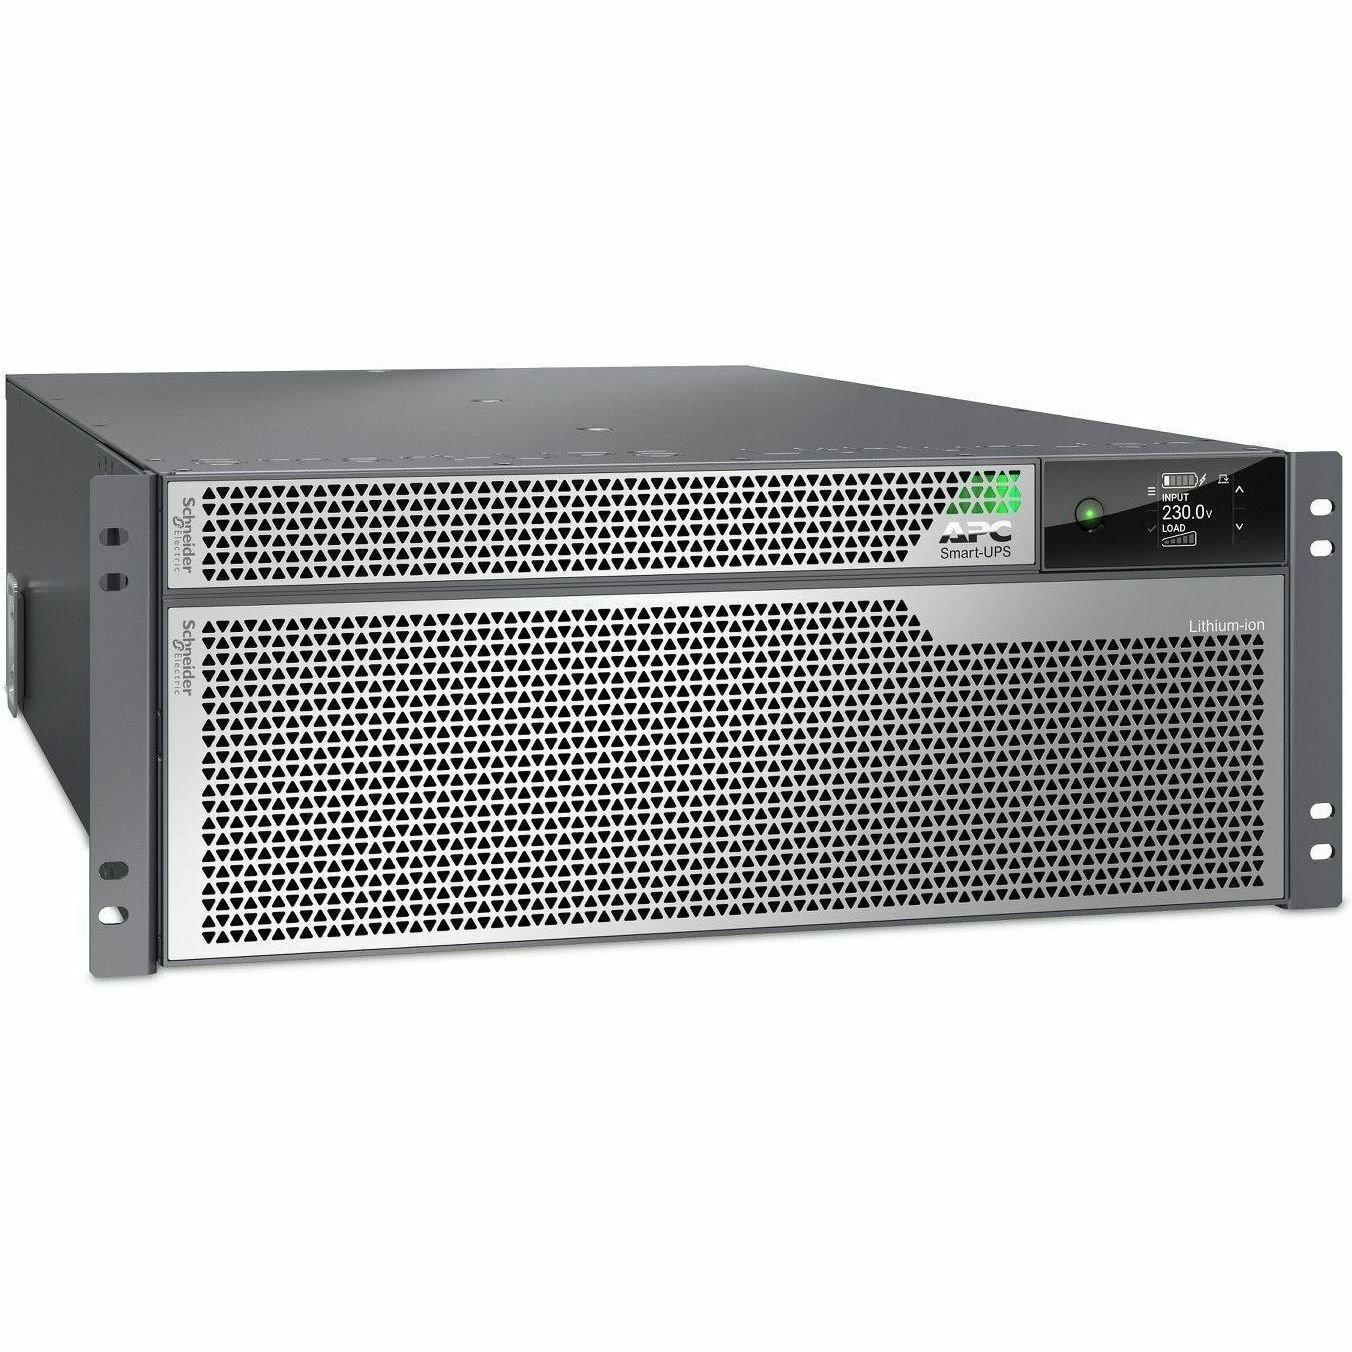 APC by Schneider Electric Smart-UPS Ultra Double Conversion Online UPS - 8 kVA/8 kW